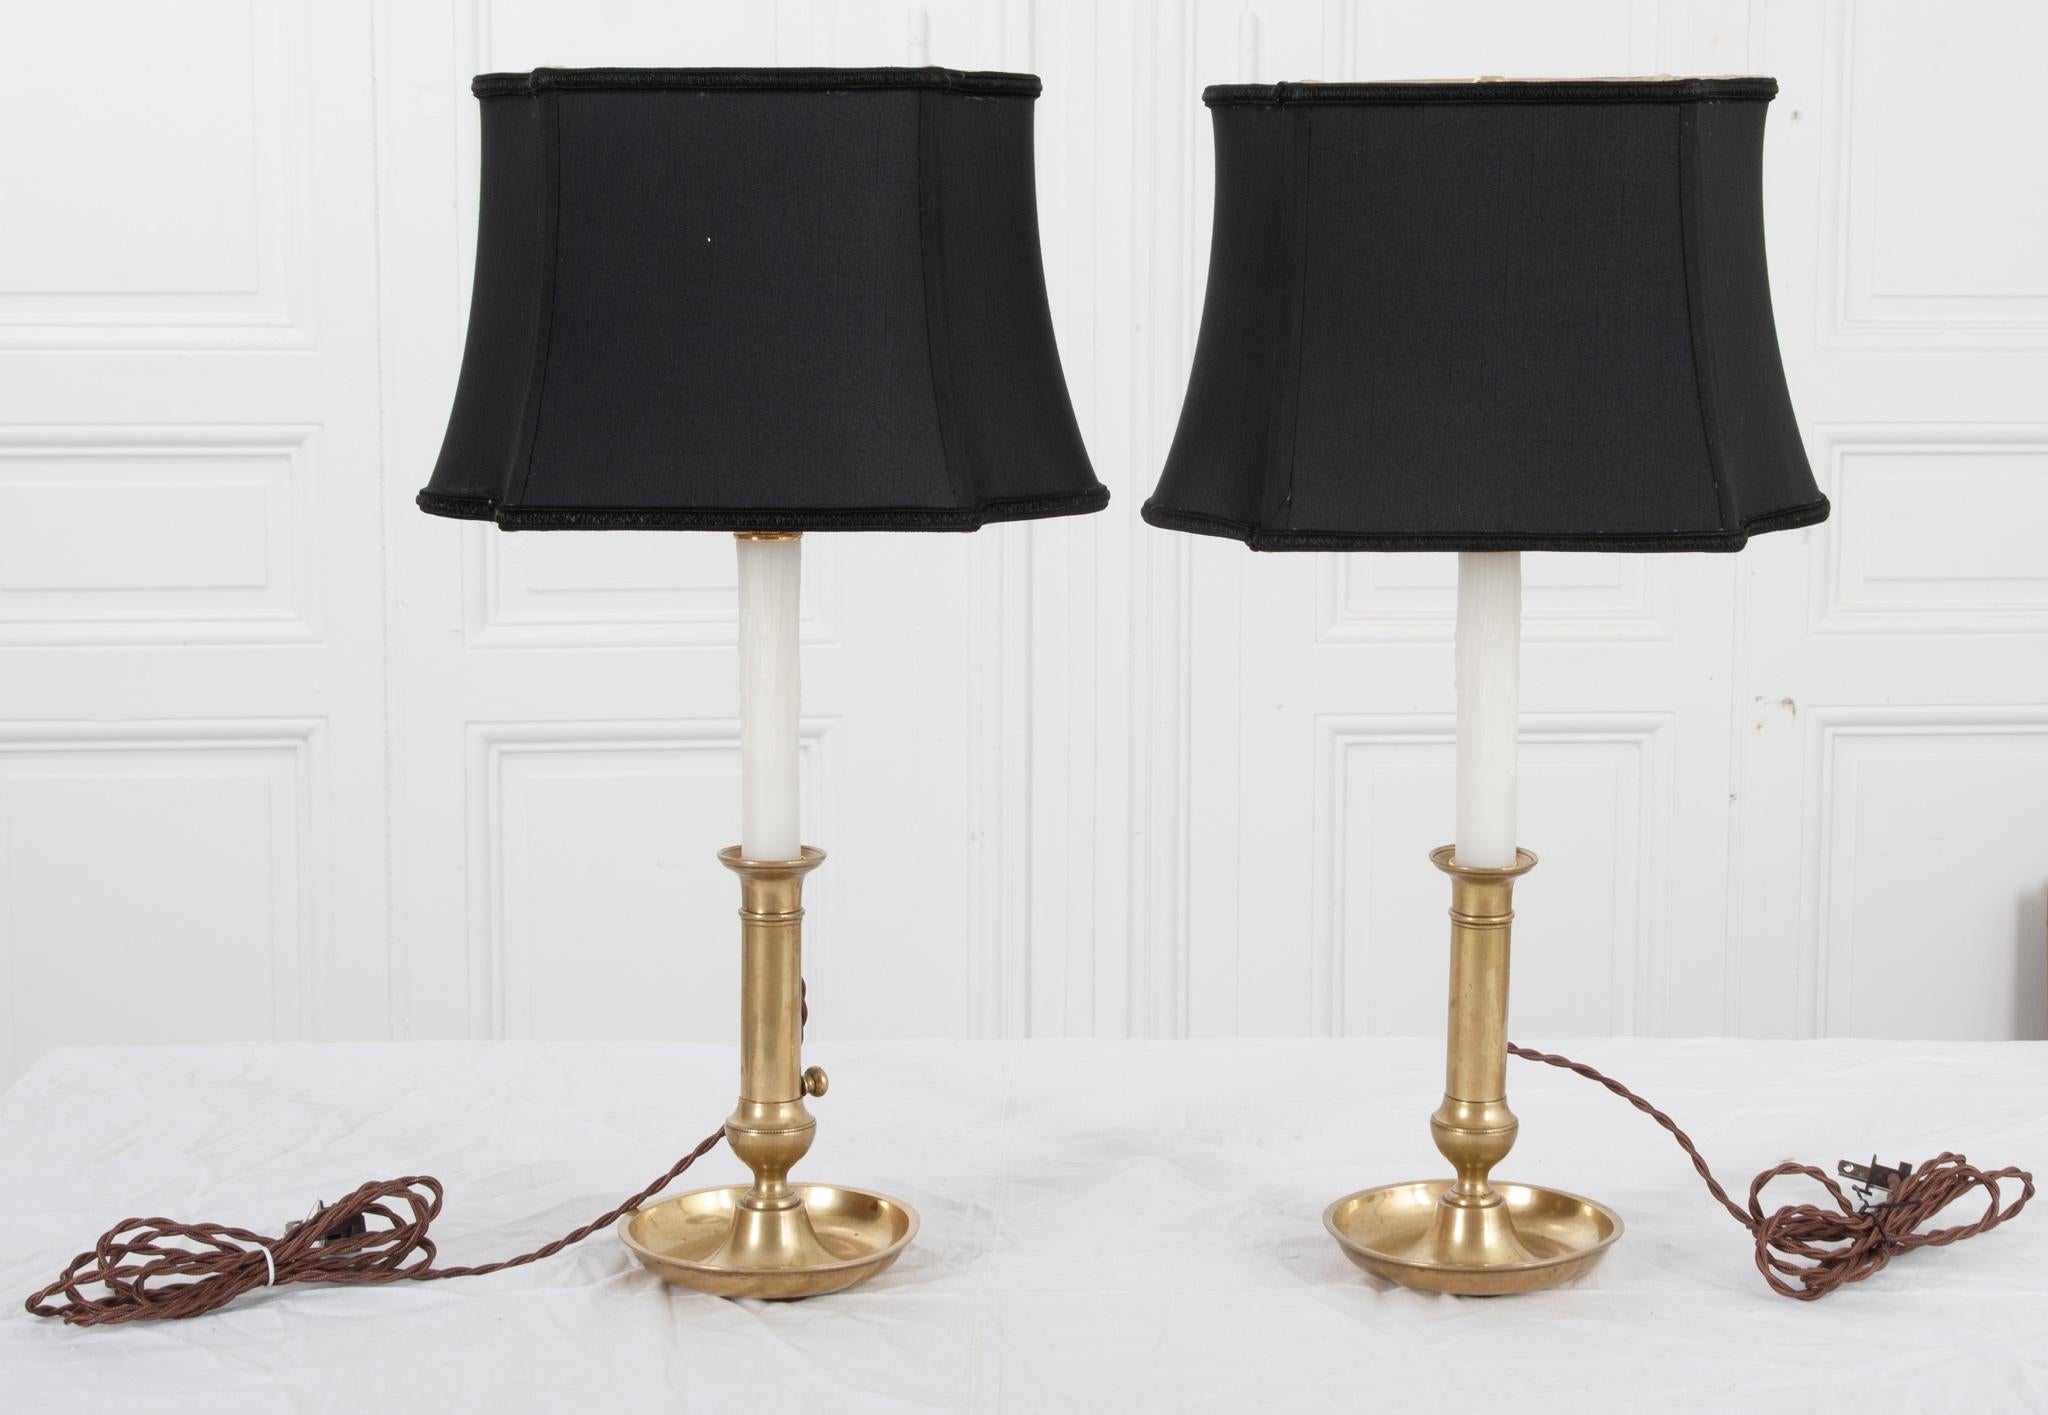 This is a charming pair of lamps with bases made from brass candlestick holders. Fixed with new, shaped fabric shades with cording. Wired for the US using UL listed parts. The sleek braided cording has been threaded into the lamp through an opening